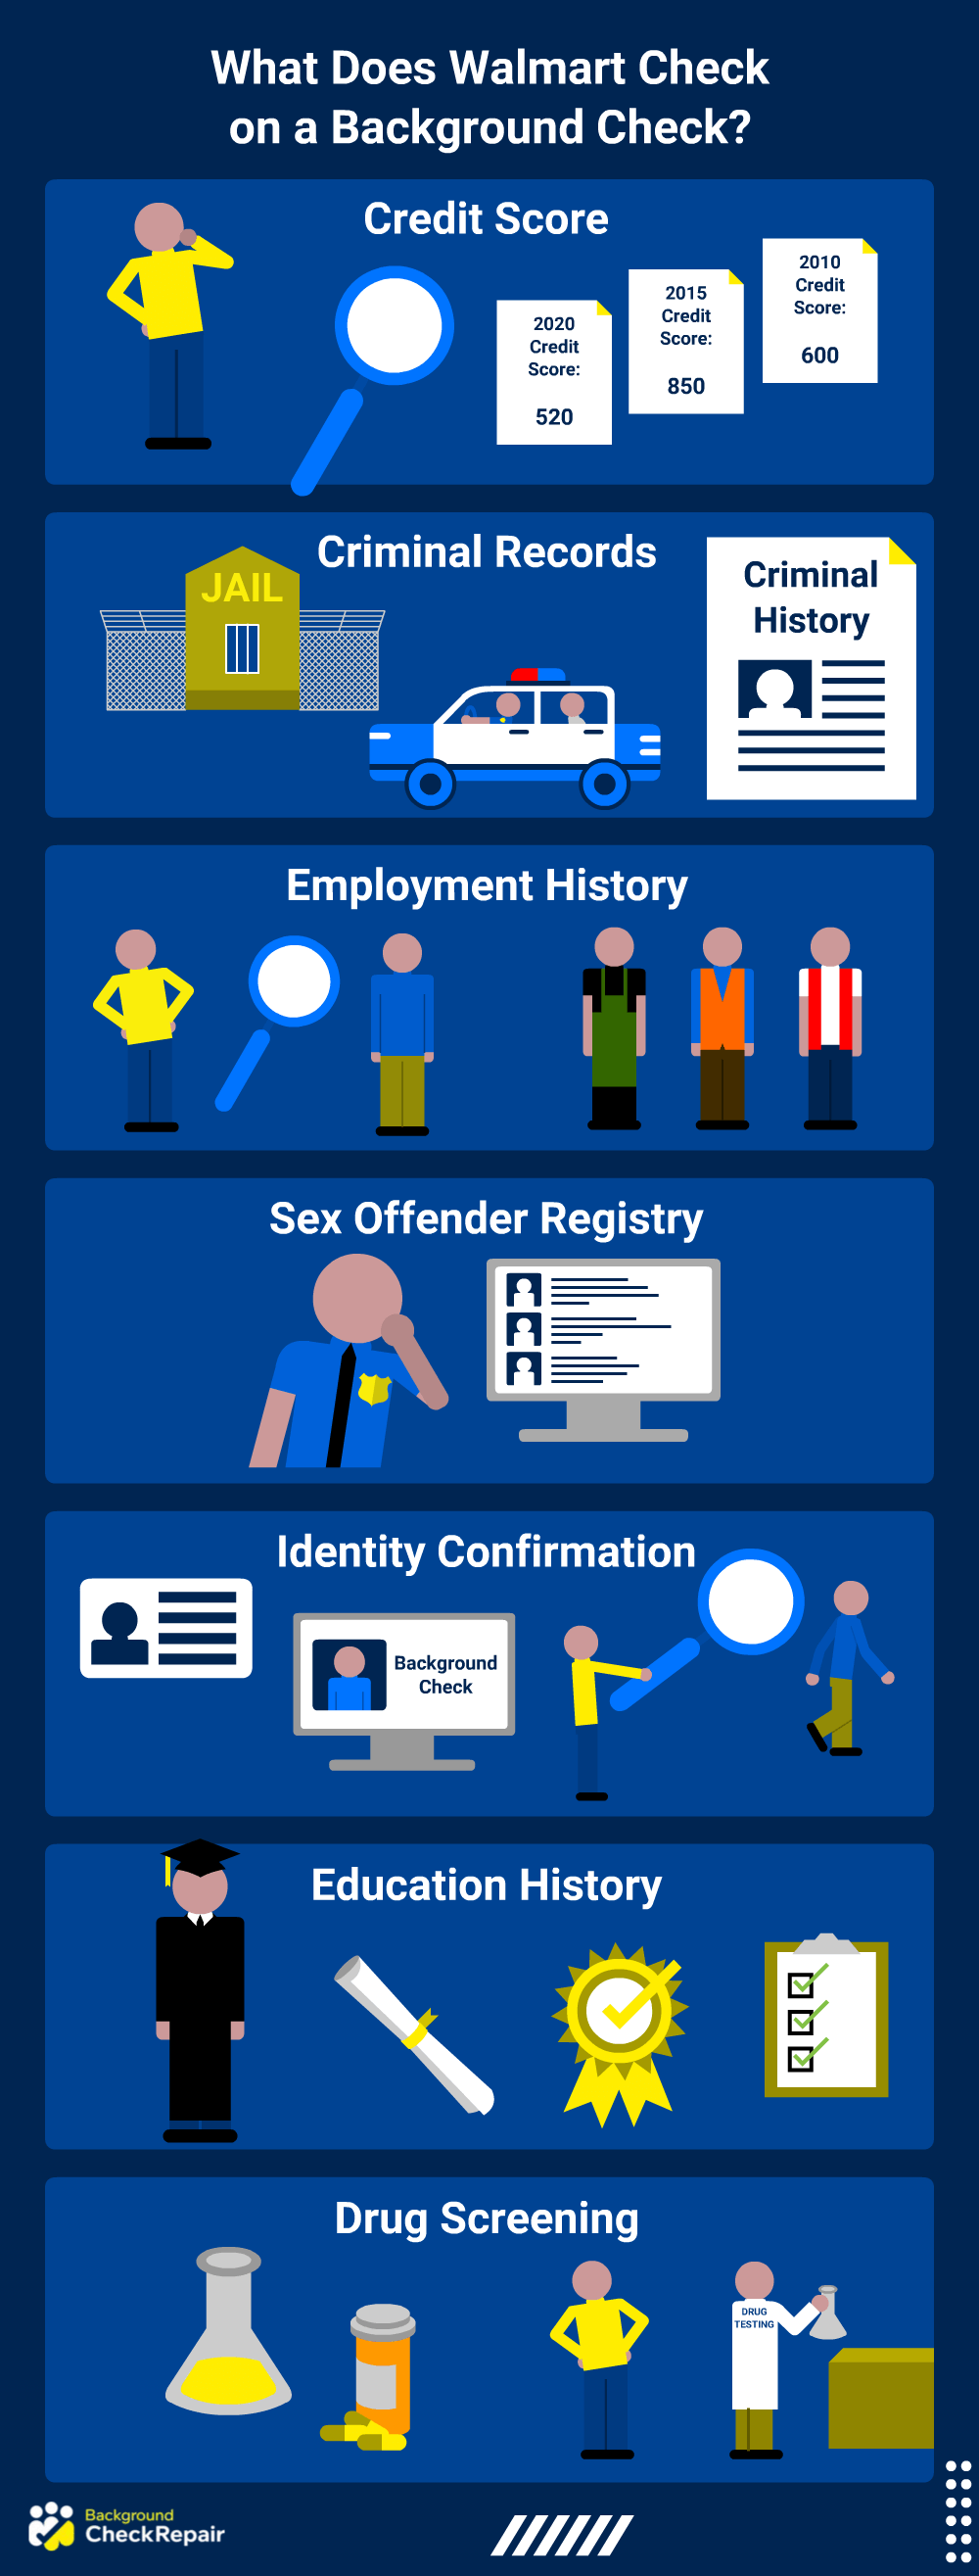 What does Walmart check on a background check graphic, showing identity confirmation and criminal records on a walmart background check, drug test for employment, sex offender registry checks and education history and credit score included in the level 1, name based background check for Walmart employees.